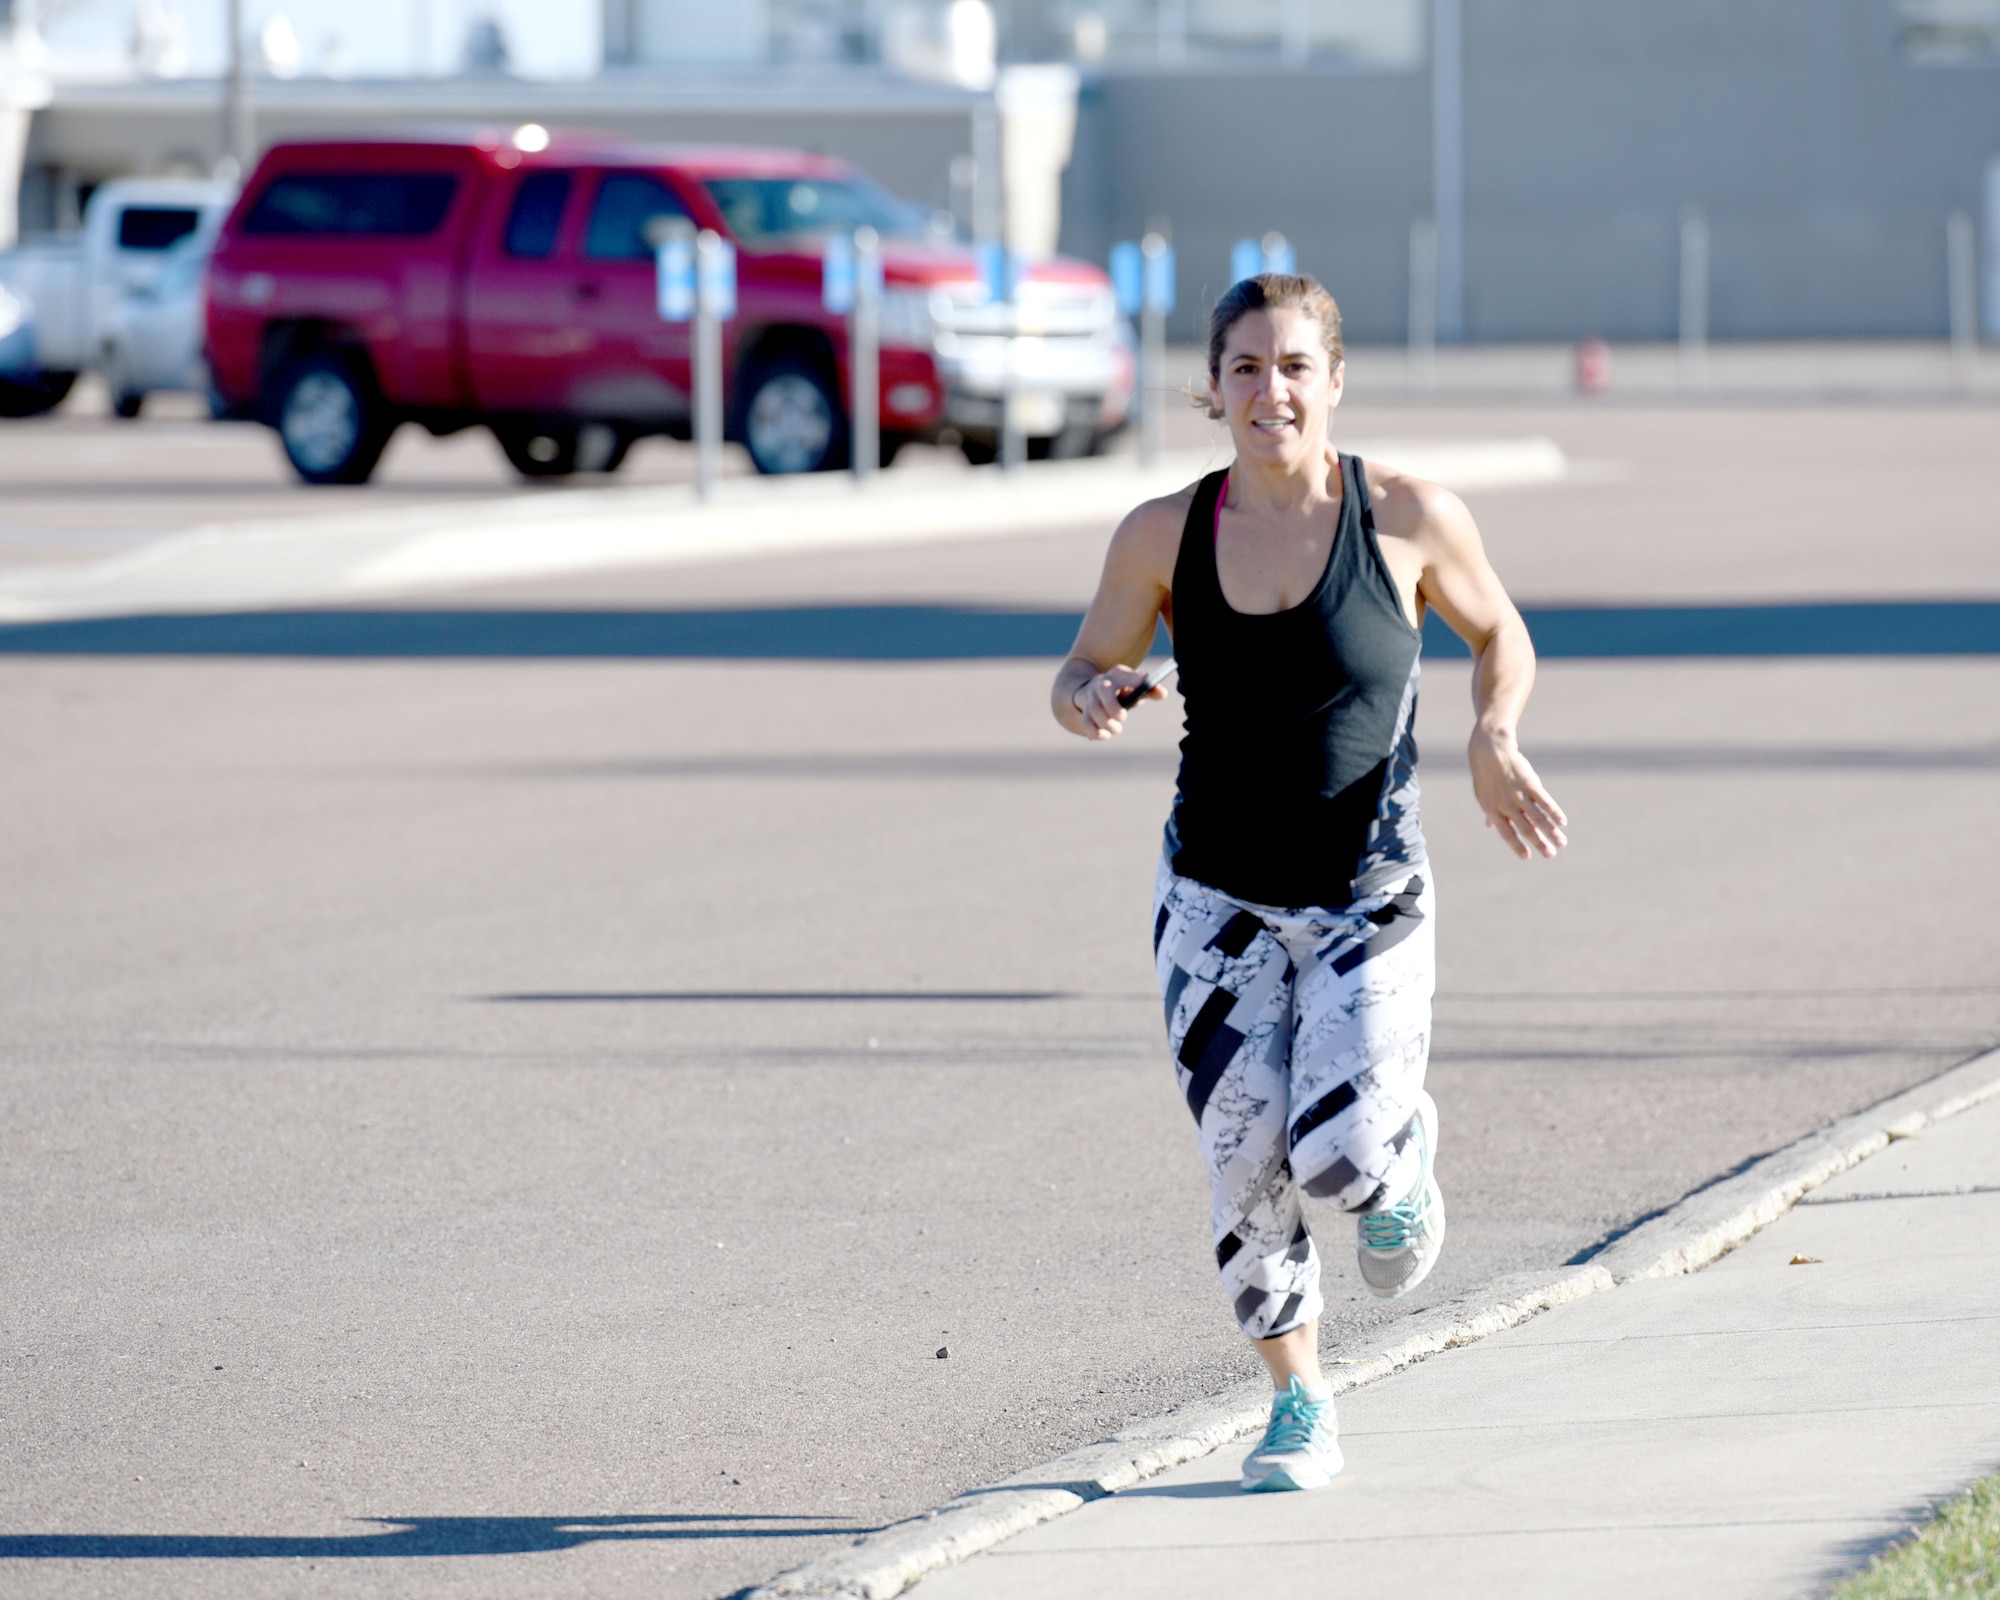 Senior Airman Jacqueline Forsyth completes the final stretch of a two mile run. Forsyth begins each of her fitness improvement classes with a run. (U.S. Air National Guard photo/Tech. Sgt. Michael Touchette)